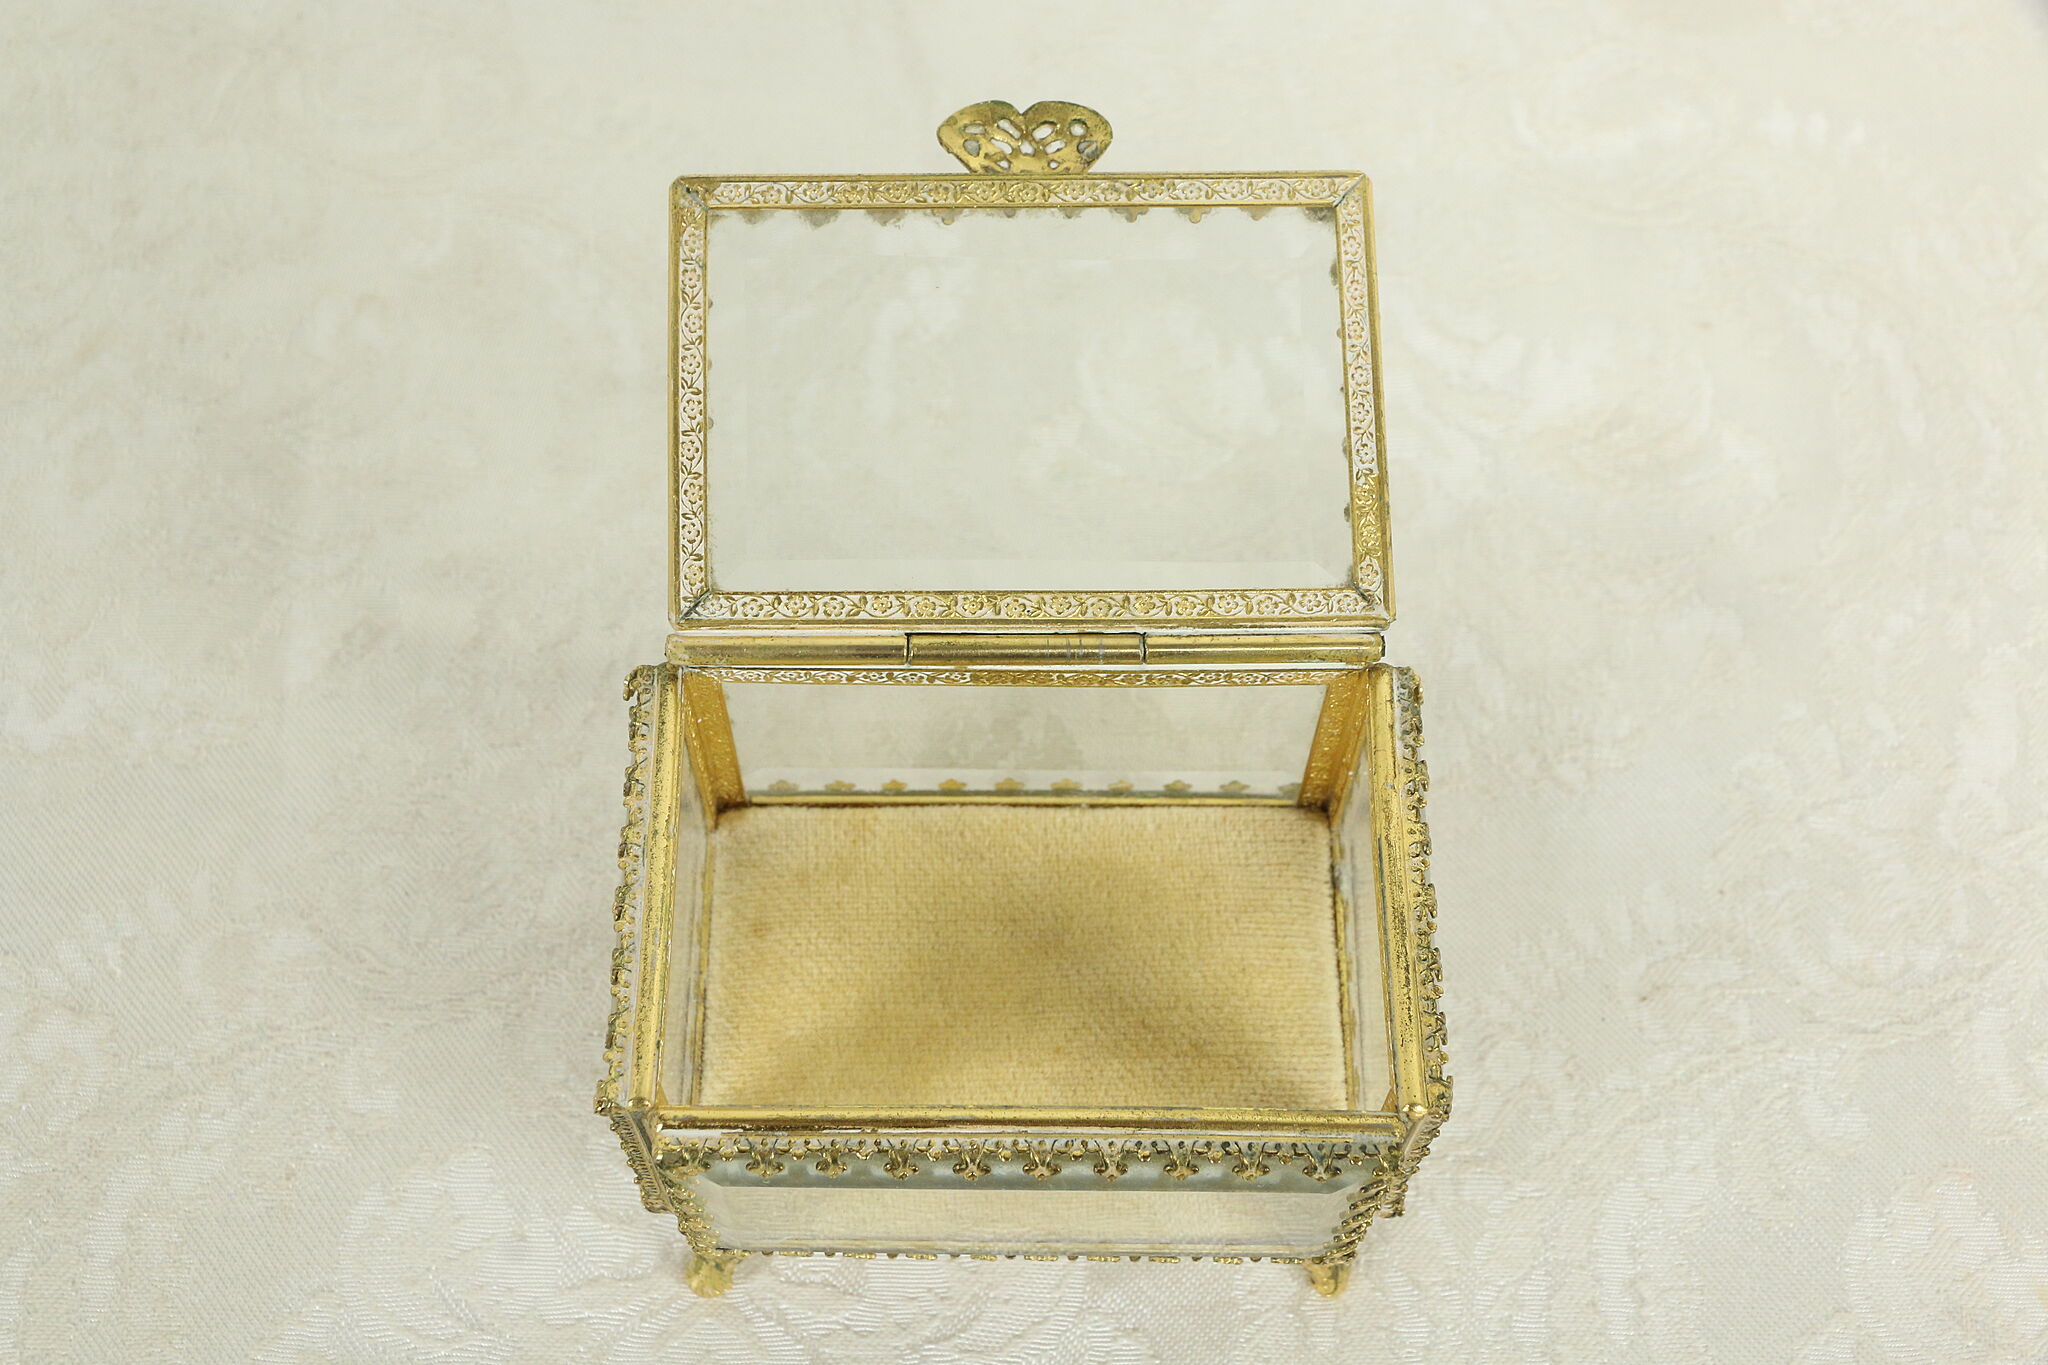 Gold Plated Beveled Glass Vintage Jewelry Box Signed Stylebuilt